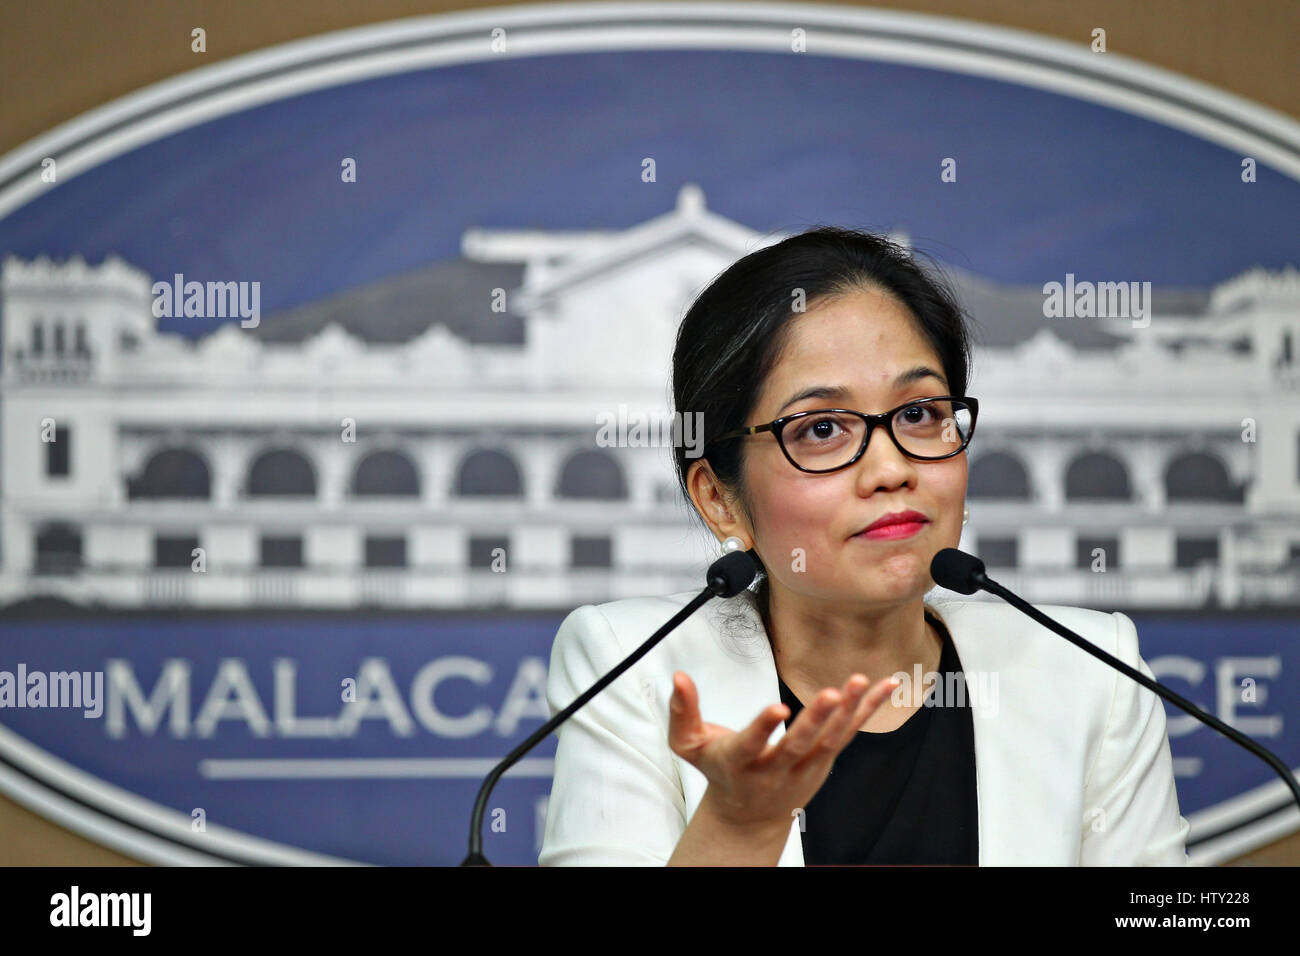 Philippine Climate Change Commissioner Frances Veronica Victorio during a press conference at the Malacanang Palace March 14, 2017 in Manila, Philippines. Victorio announced that a 2-degree Celsius rise in temperature will put 98 percent of the coral reefs in the Philippines at risk. She also emphasizes that the Philippines only contributes one-third of 1 percent of yearly global emissions. Stock Photo